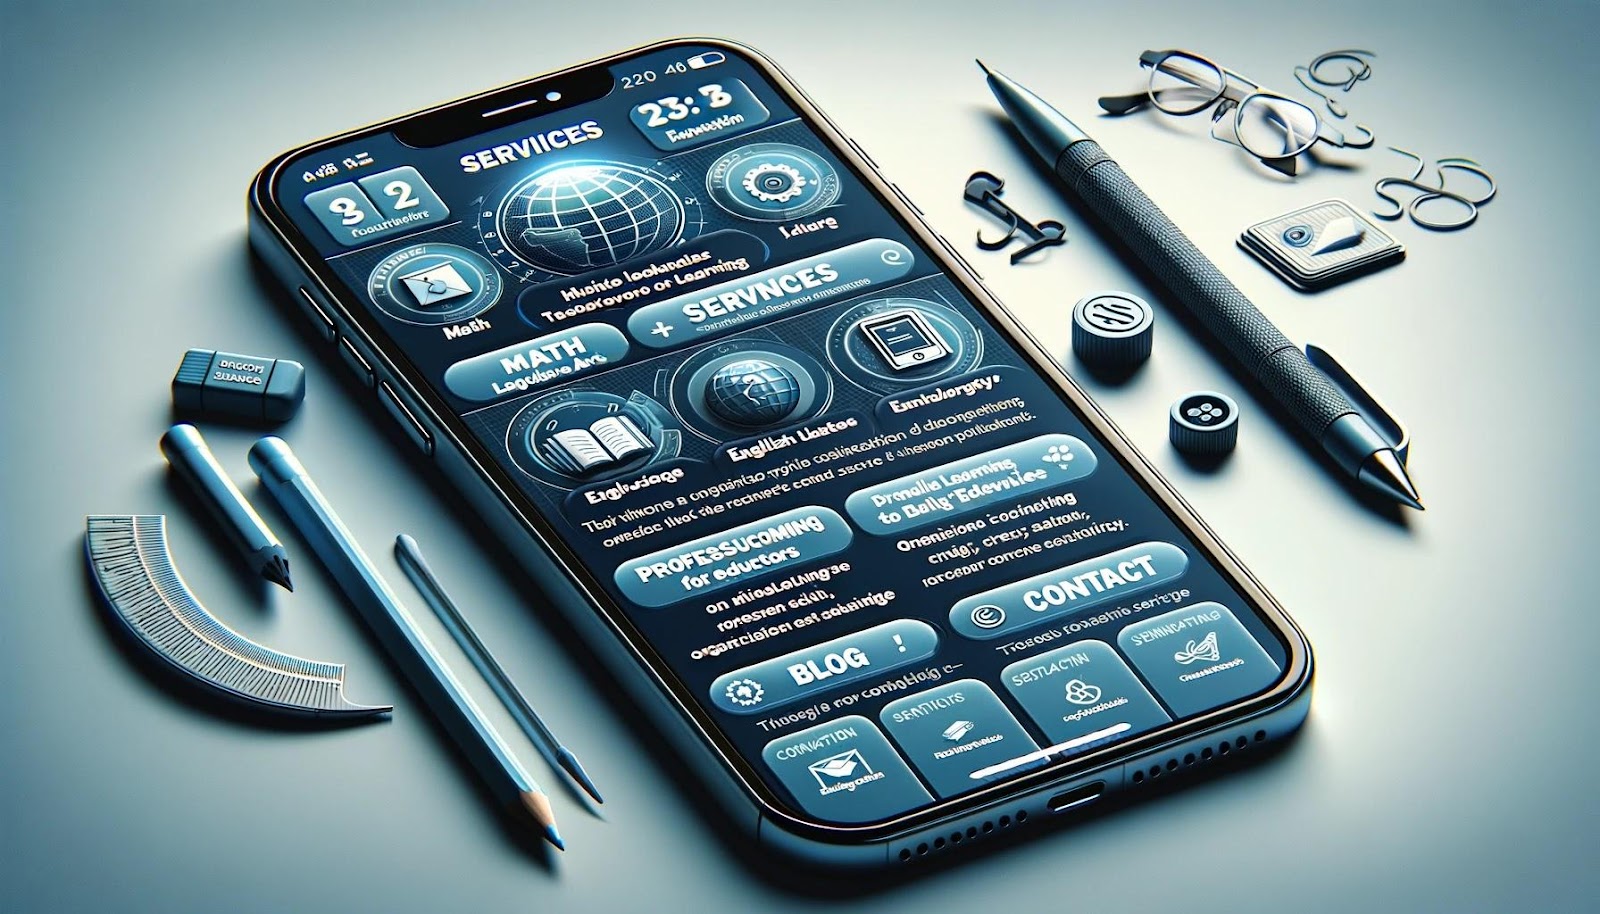 A widescreen image of a smartphone displaying the homepage of an educational technology company called 'A360 Education'. The screen includes several key sections. The 'Services' section highlights tools for Math, Science, English Language Arts, professional development for educators, and organizational consulting services. The 'Mission, Vision, and Values' section showcases the company's commitment to innovation, quality, and integrity. A 'Blog' section features articles on remote learning and the future of educational technology. Lastly, a 'Contact' section offers contact options like phone, email, and a physical location in Nebraska, USA. The design should be sleek, modern, and highly professional.